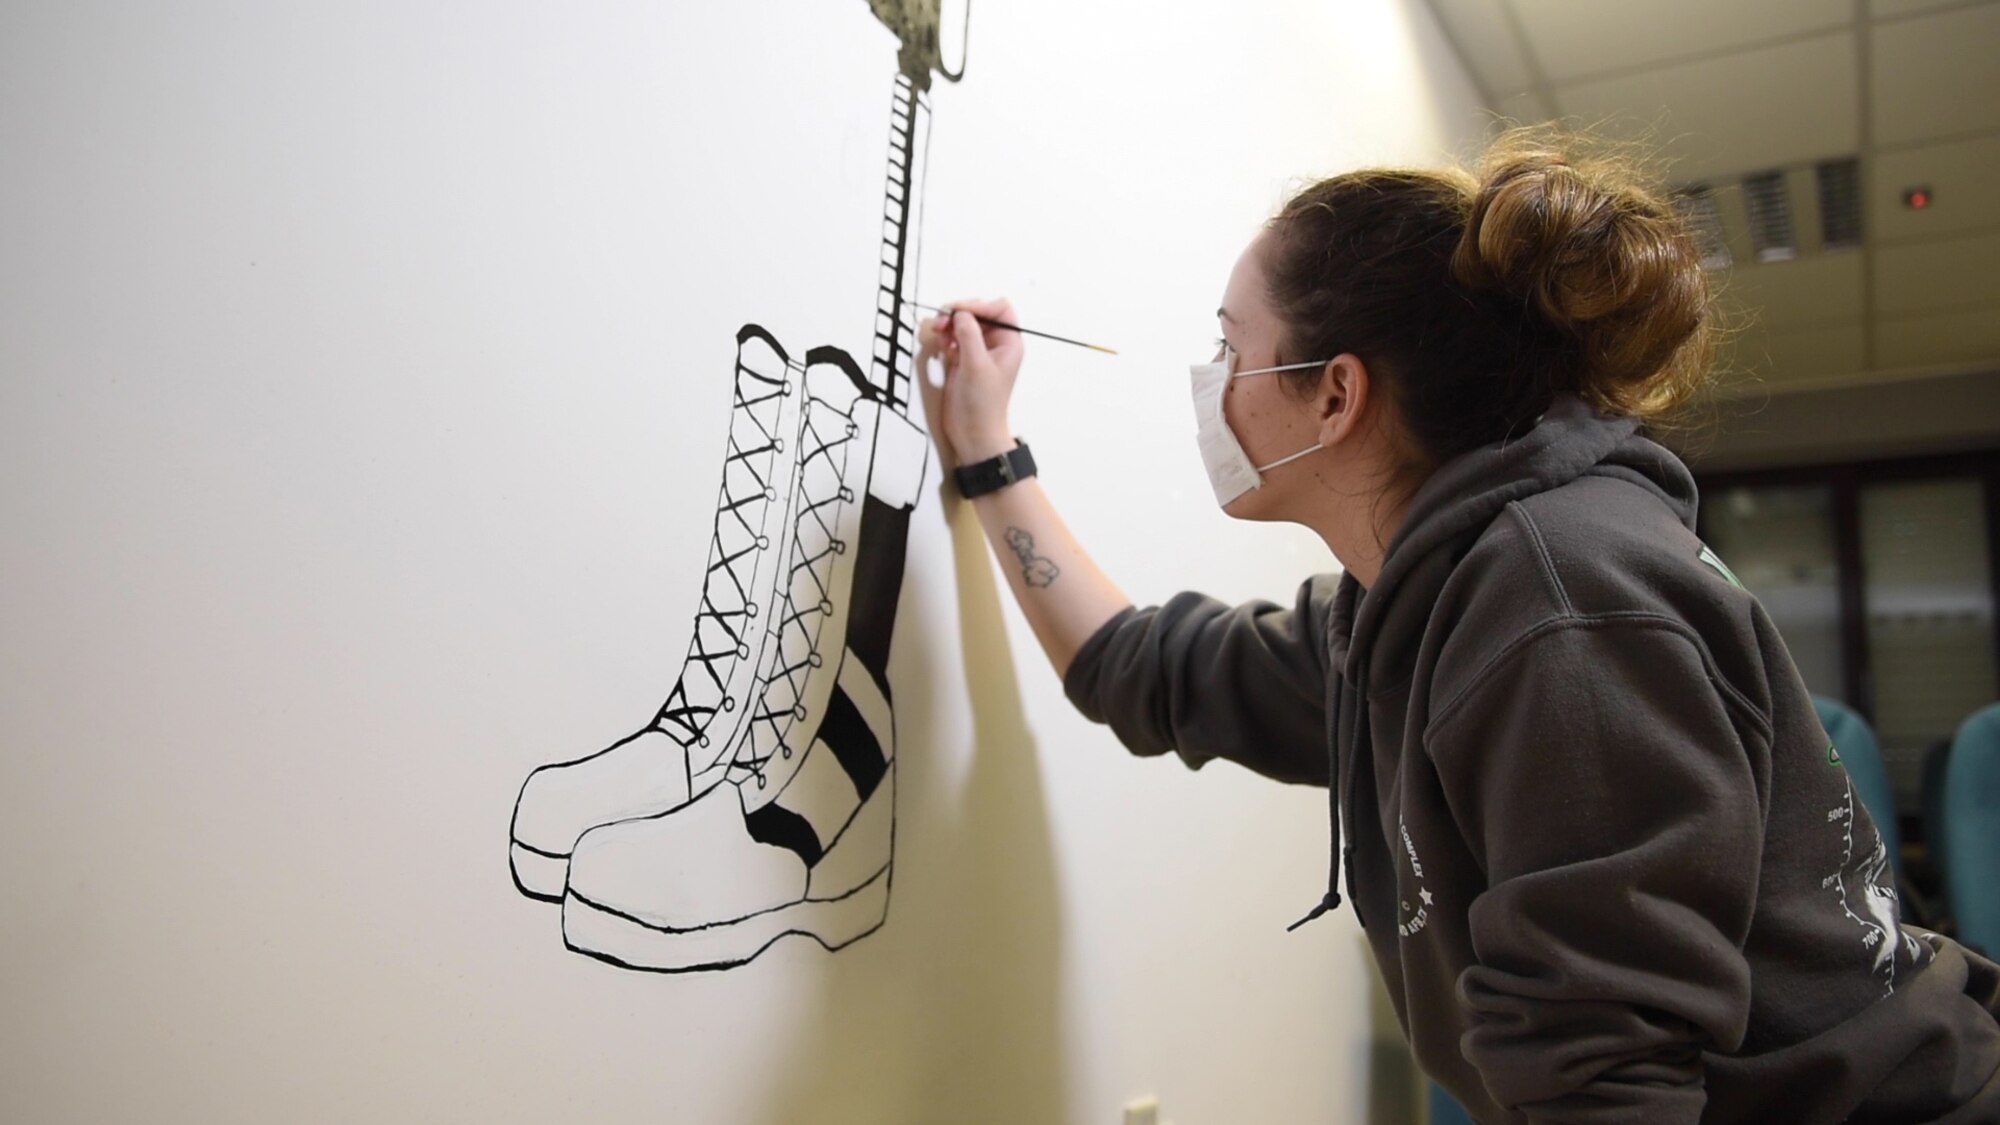 U.S. Air Force Airman 1st Class Anna Whittington, 39th Security Forces Squadron commander’s support staff, paints a battlefield cross April 23, 2020, at Incirlik Air Base, Turkey. A battlefield cross is a memorial featuring a rifle pointed downward into a pair of boots and topped with a helmet, and symbolizes troops who have paid the ultimate sacrifice. (U.S. Air Force photo by Staff Sgt. Joshua Magbanua)